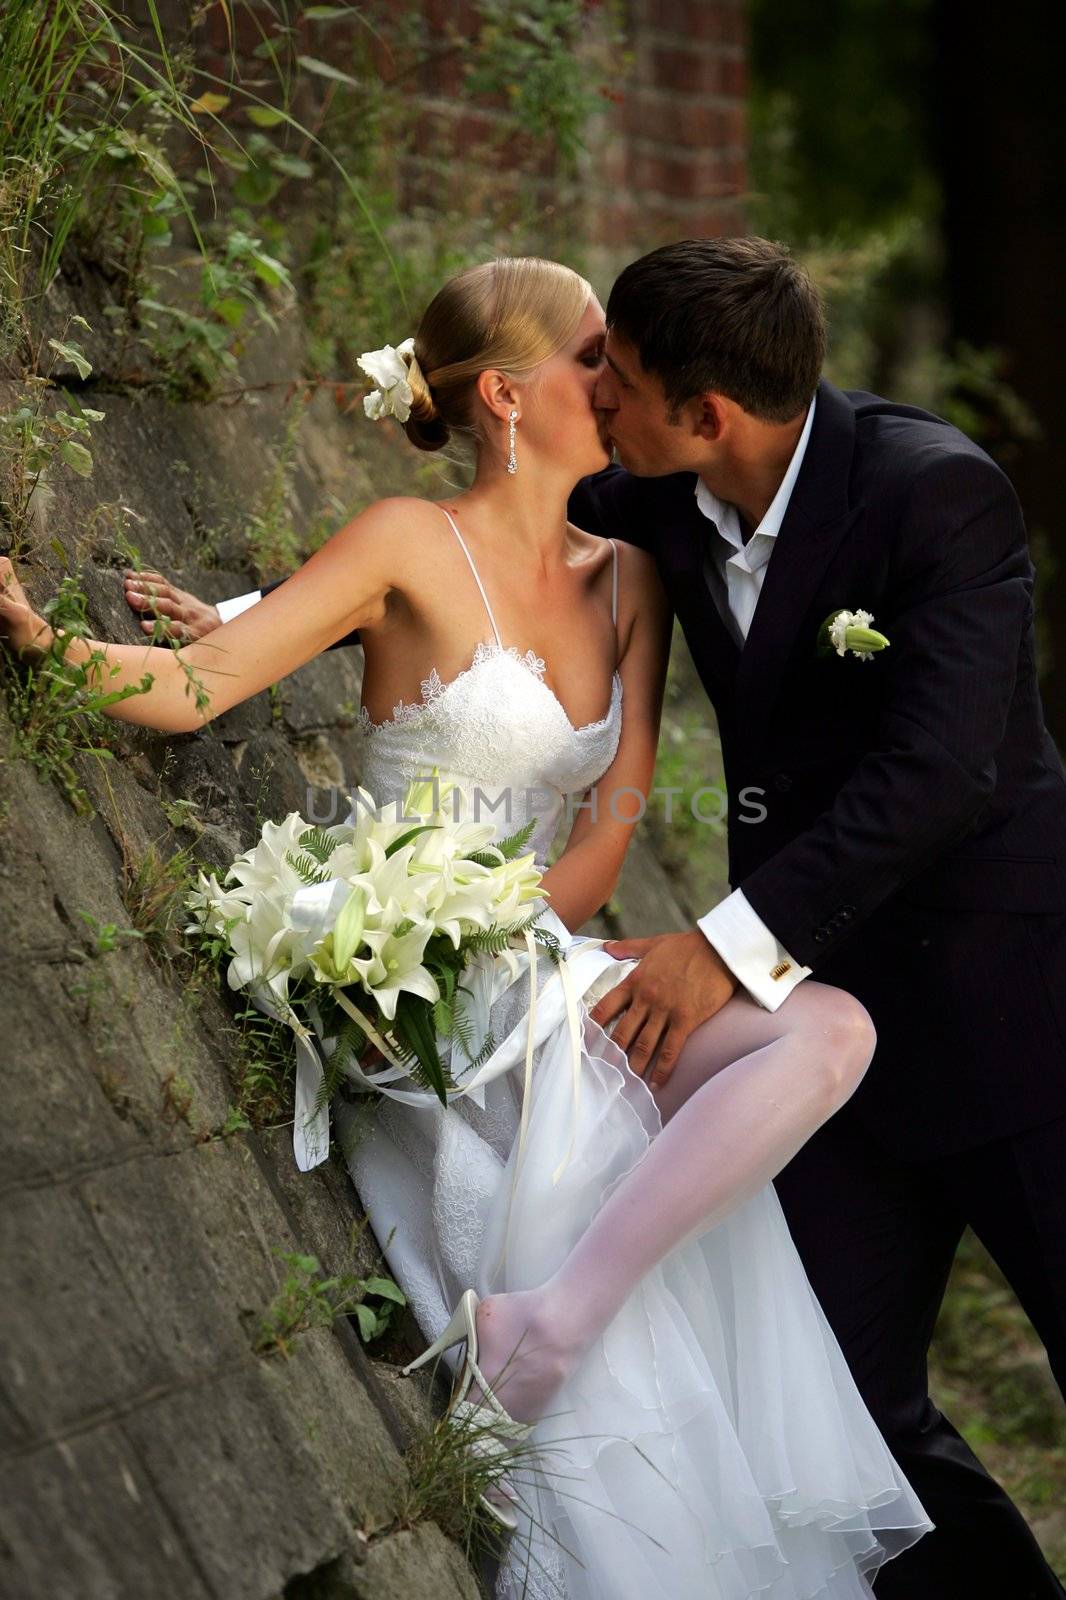 Kissing newlywed couple leaning against wall in countryside.